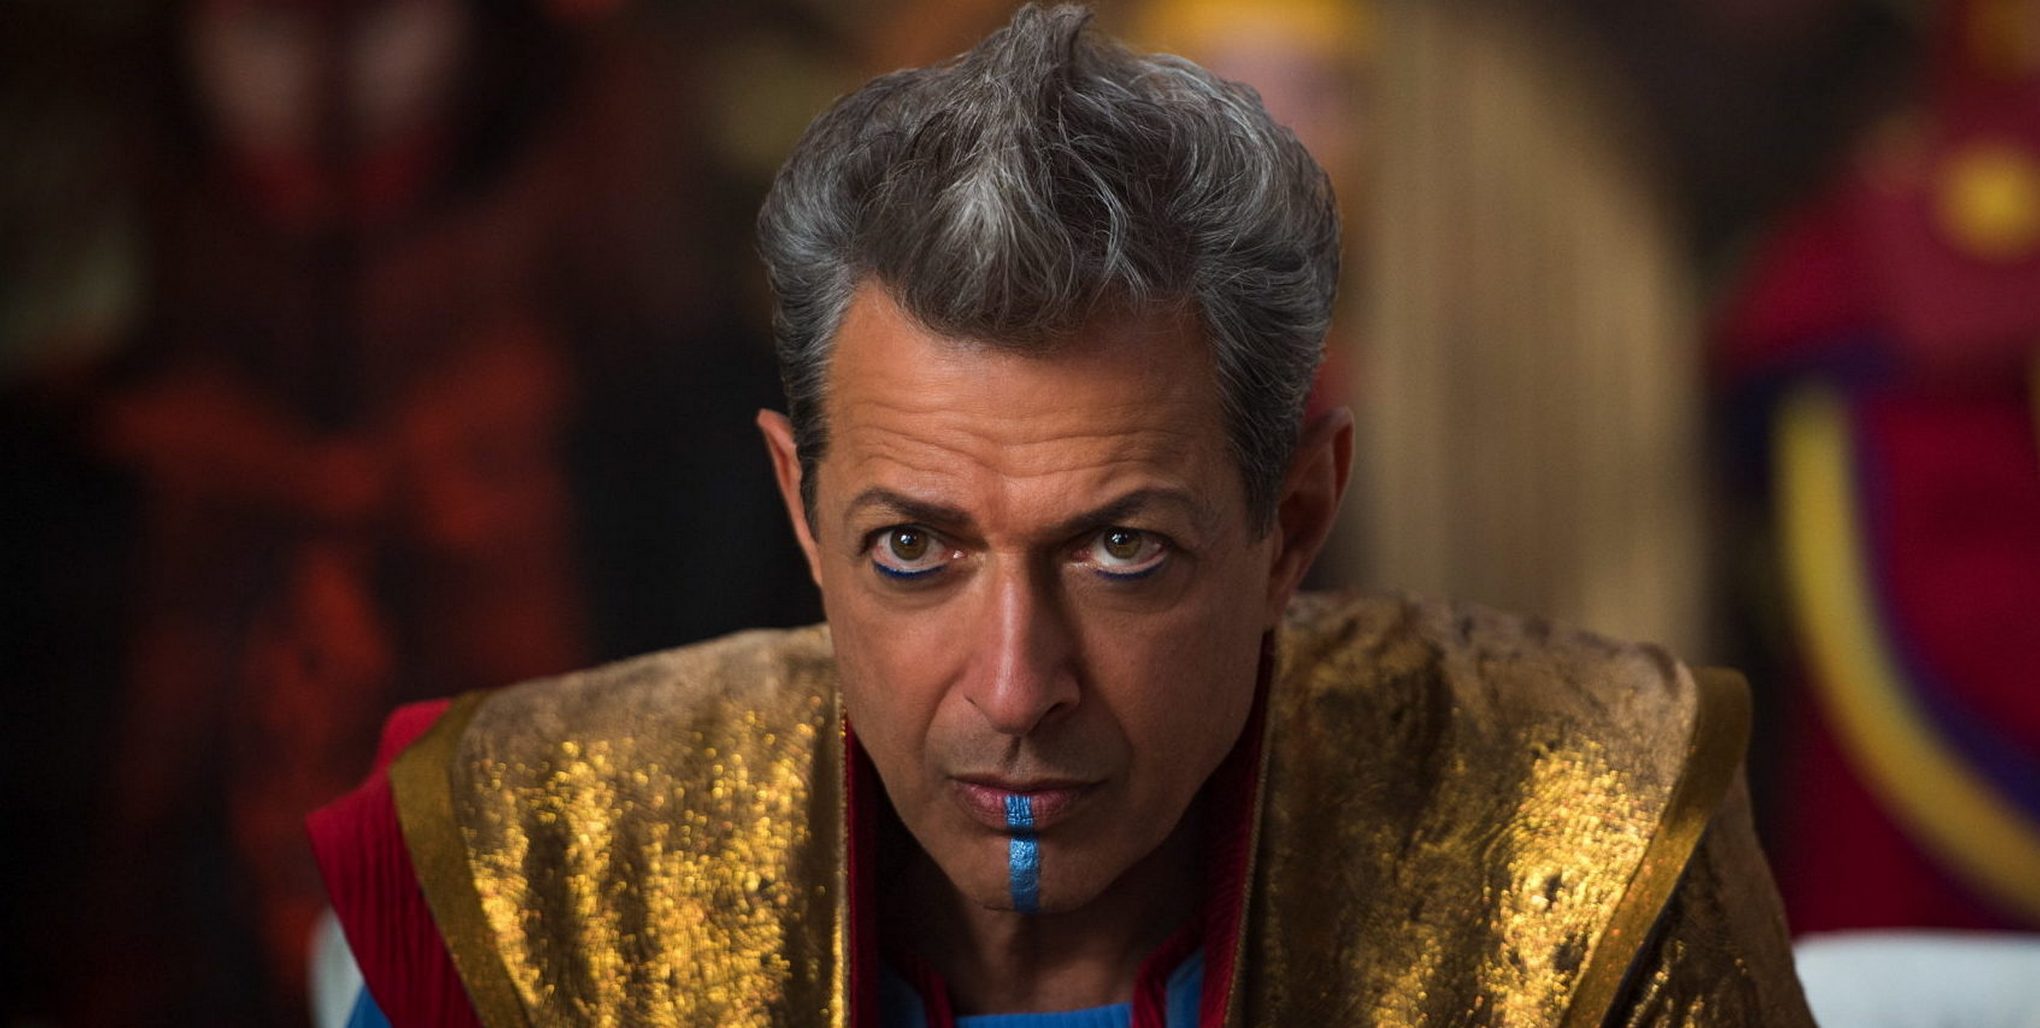 Jeff Goldblum wants the Grandmaster and Collector to team up in a Marvel movie